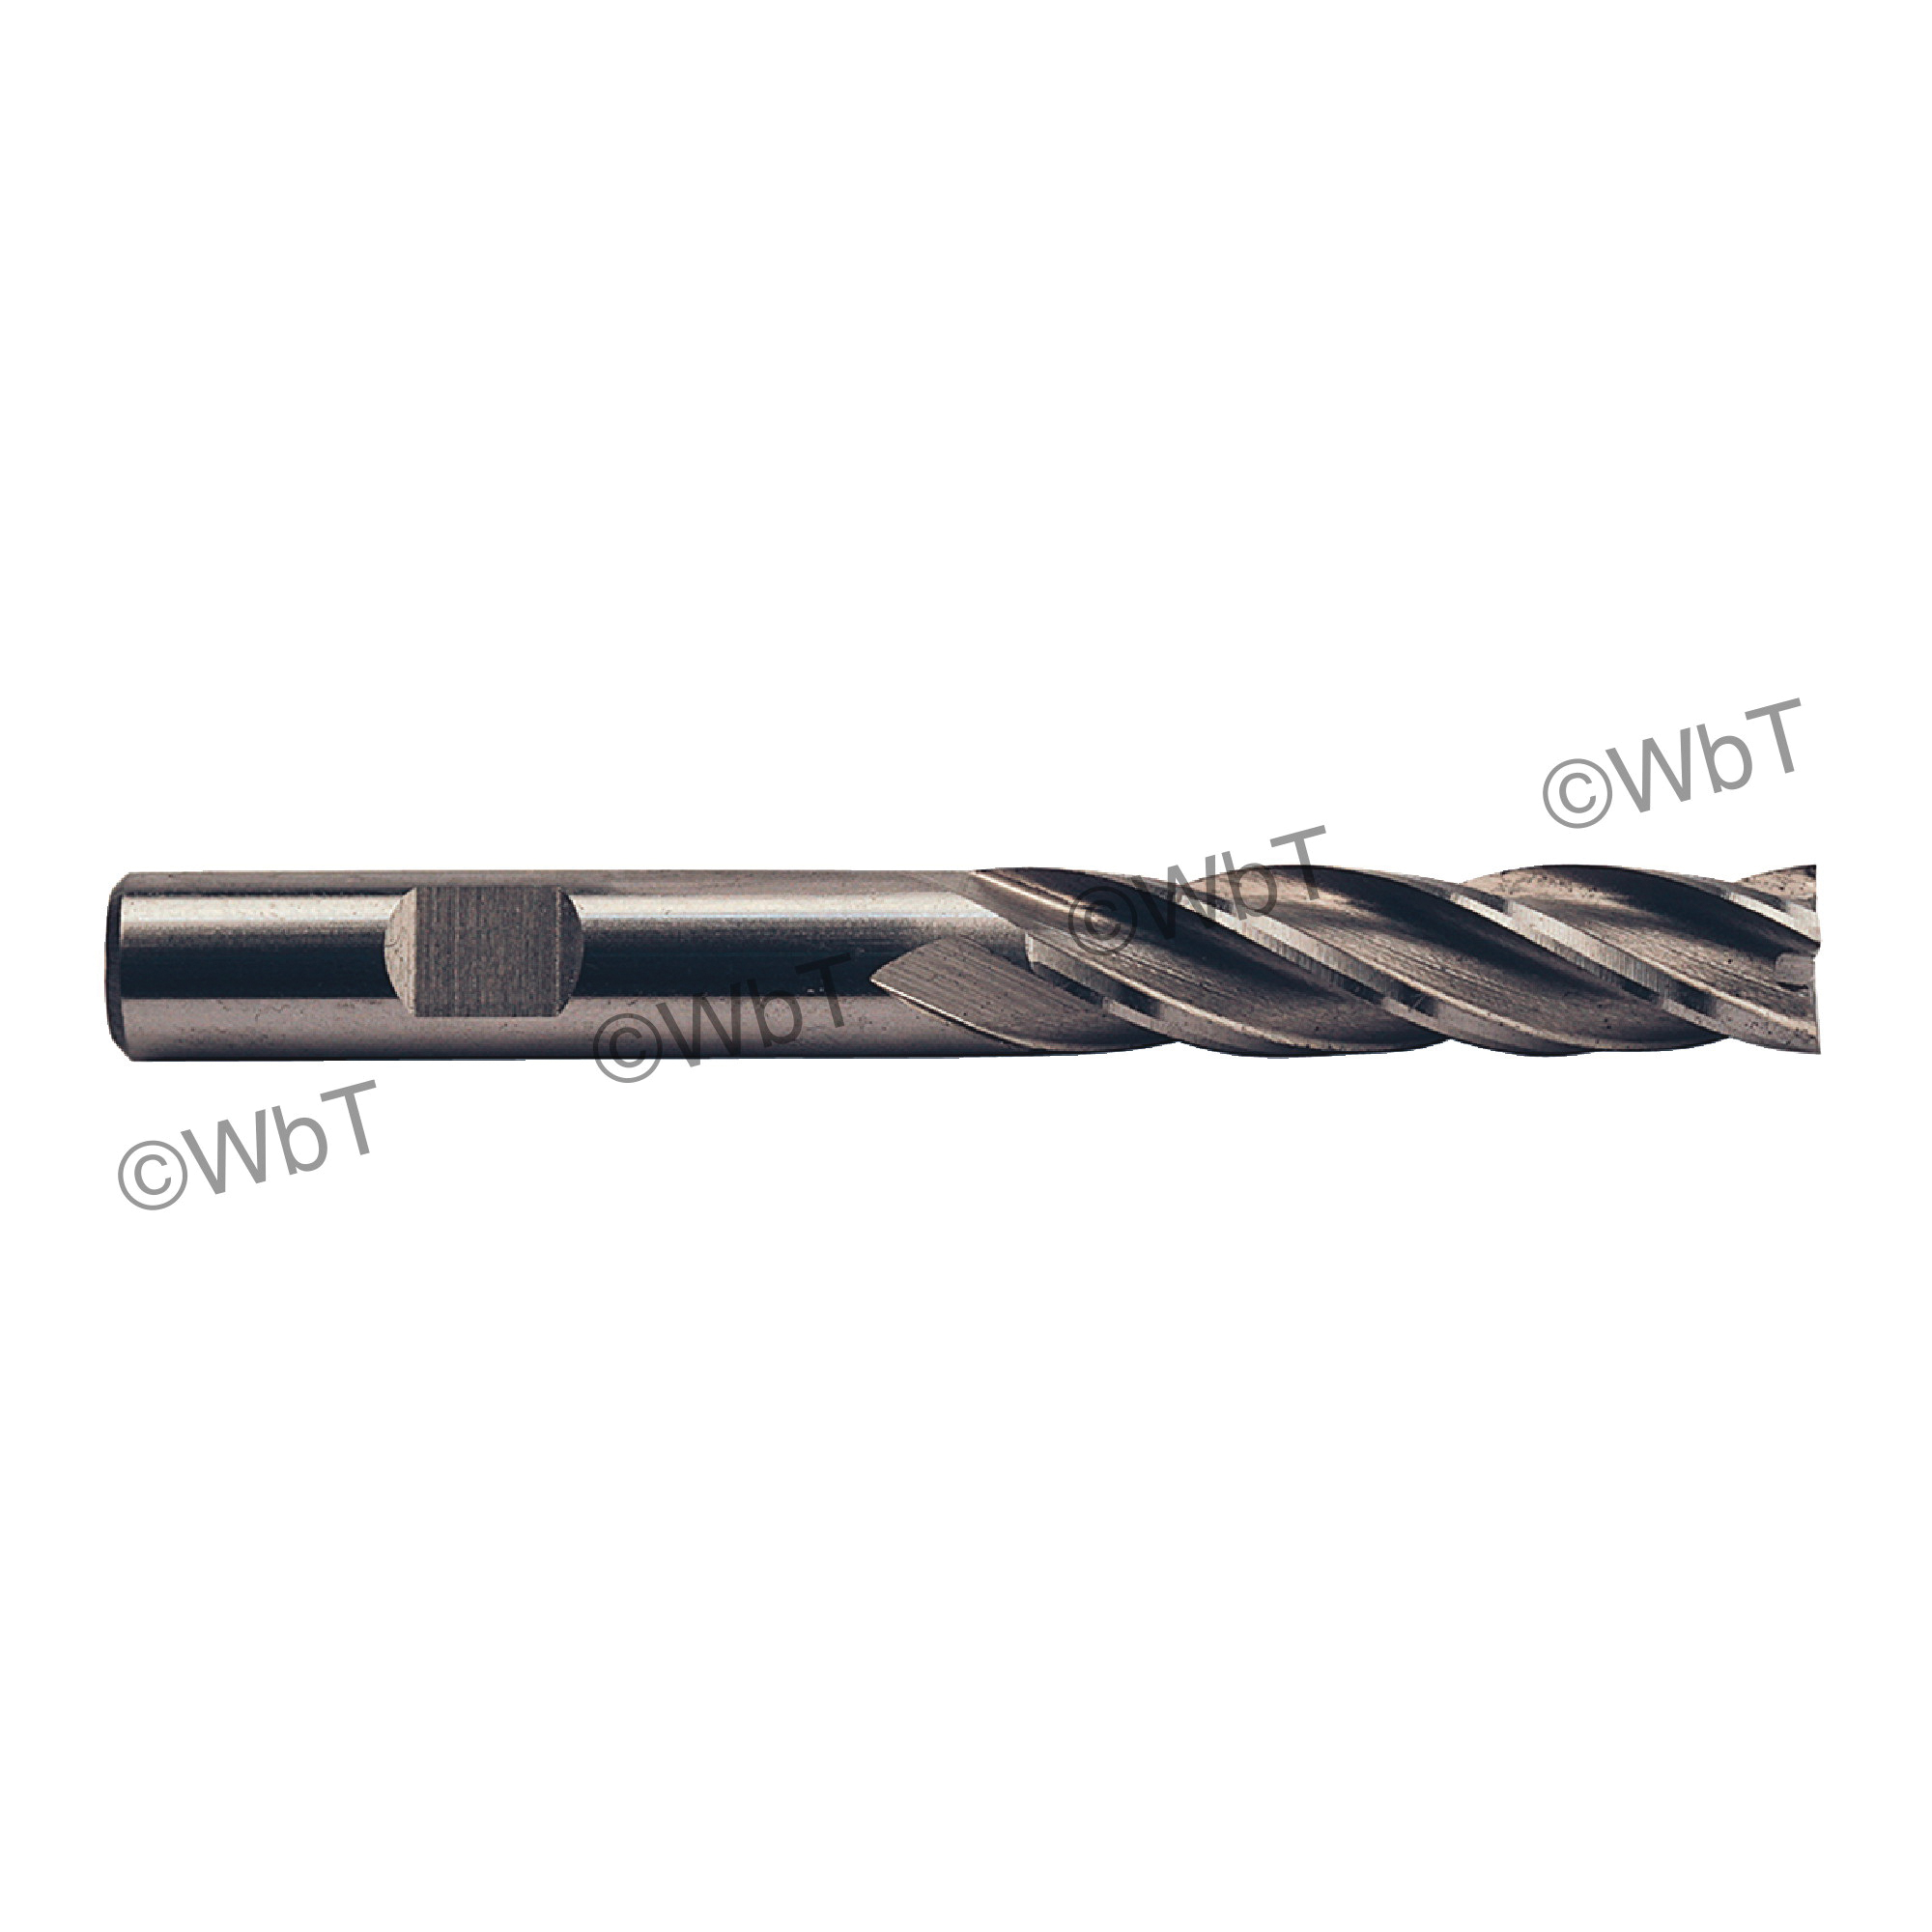 TTC 08-016-020 D6 Center Cutting Long Length Single End Mill, 1/4 in Dia Cutter, 1-1/4 in Length of Cut, 4 Flutes, 3/8 in Dia Shank, 3-1/16 in OAL, Bright